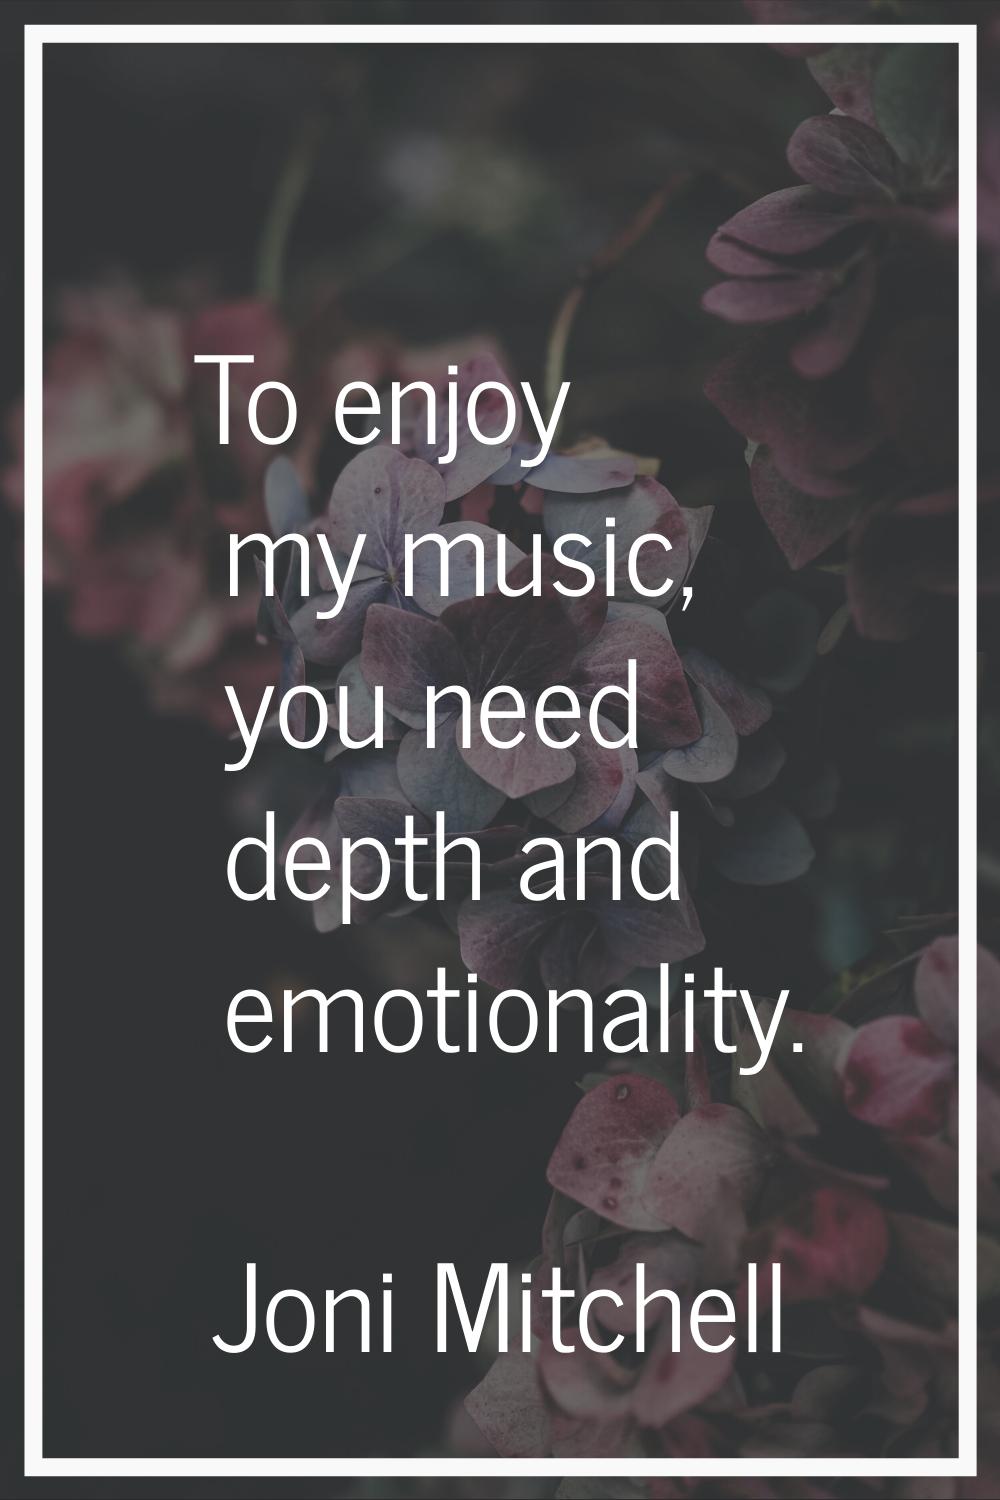 To enjoy my music, you need depth and emotionality.